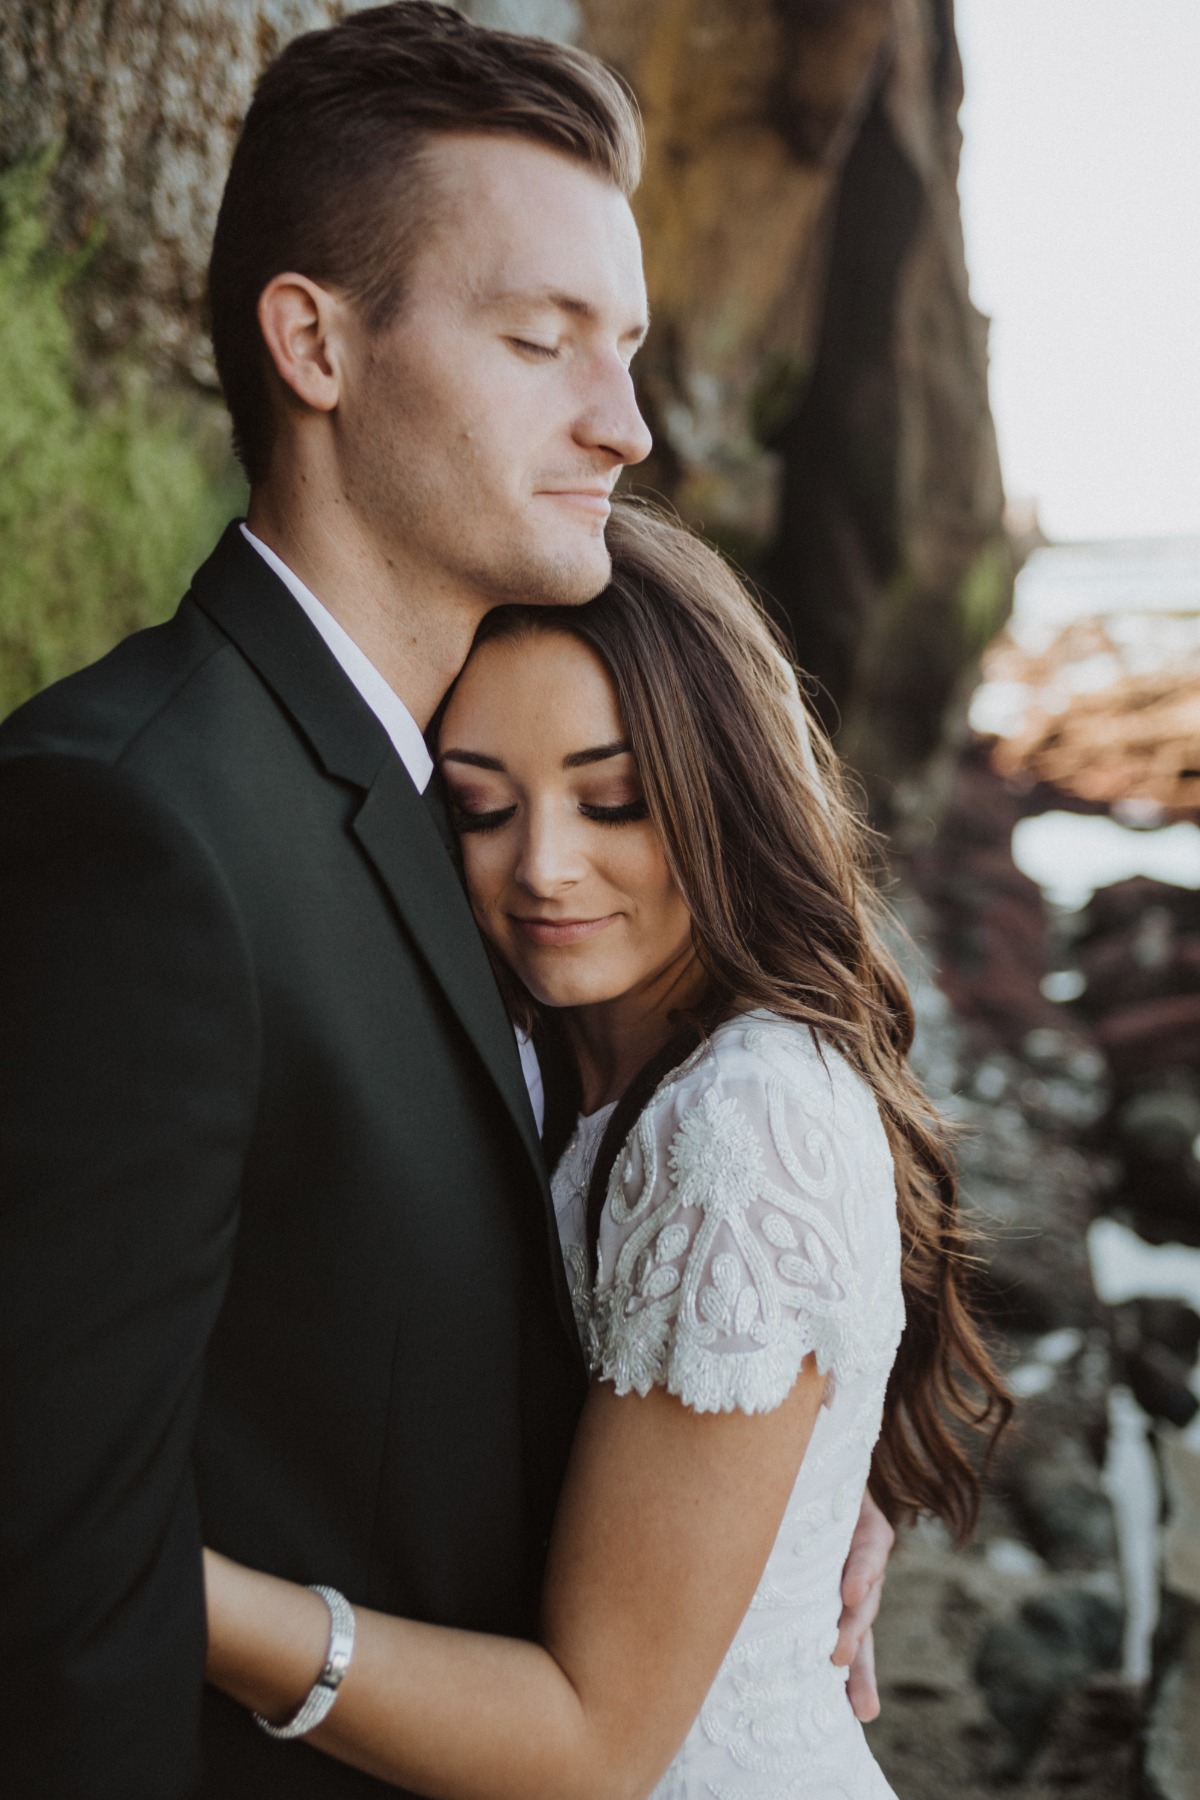 Simple Homemade San Diego Elopement